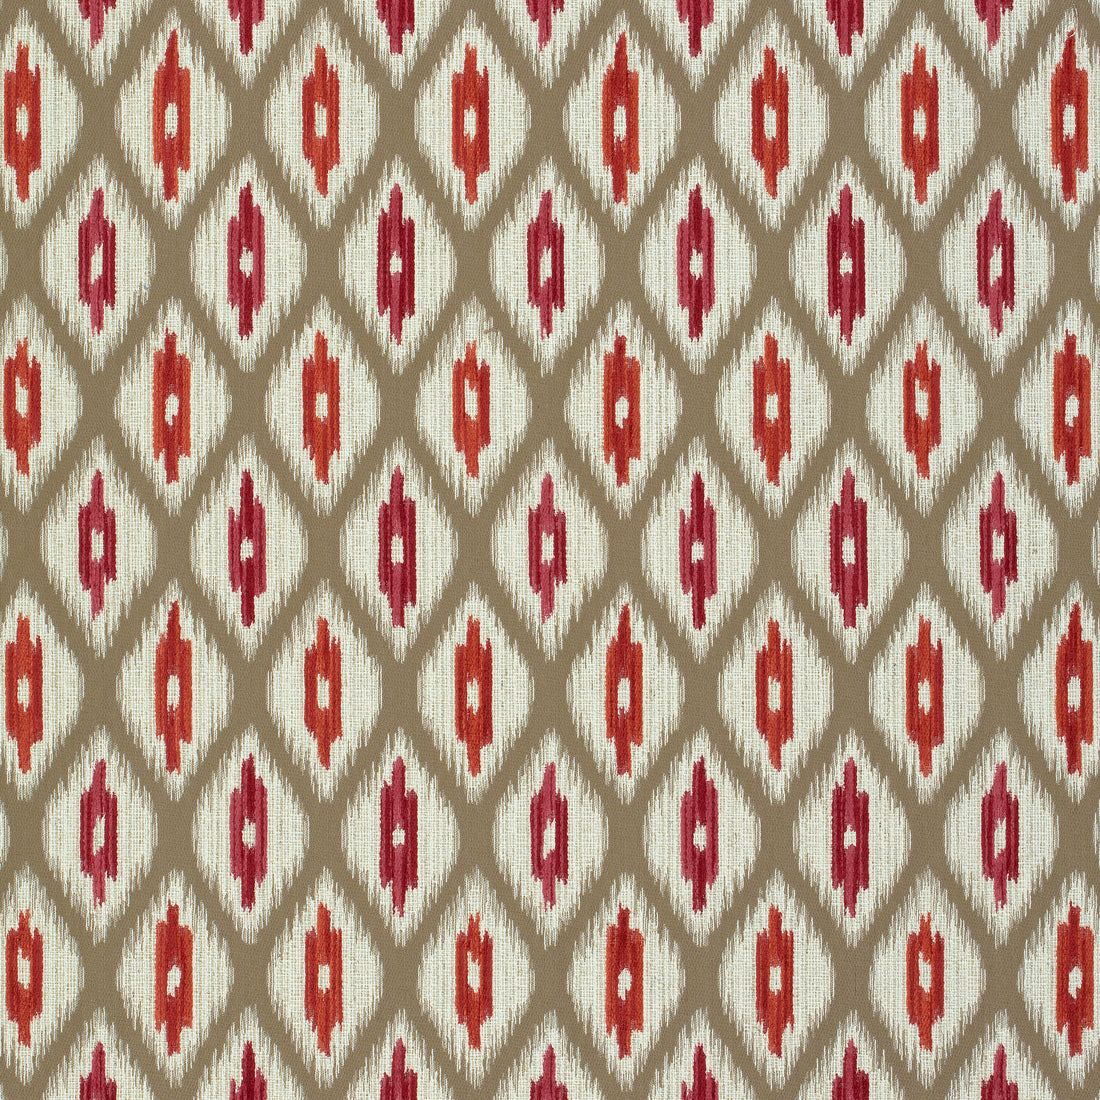 Rajah fabric in linen color - pattern number W73363 - by Thibaut in the Nomad collection